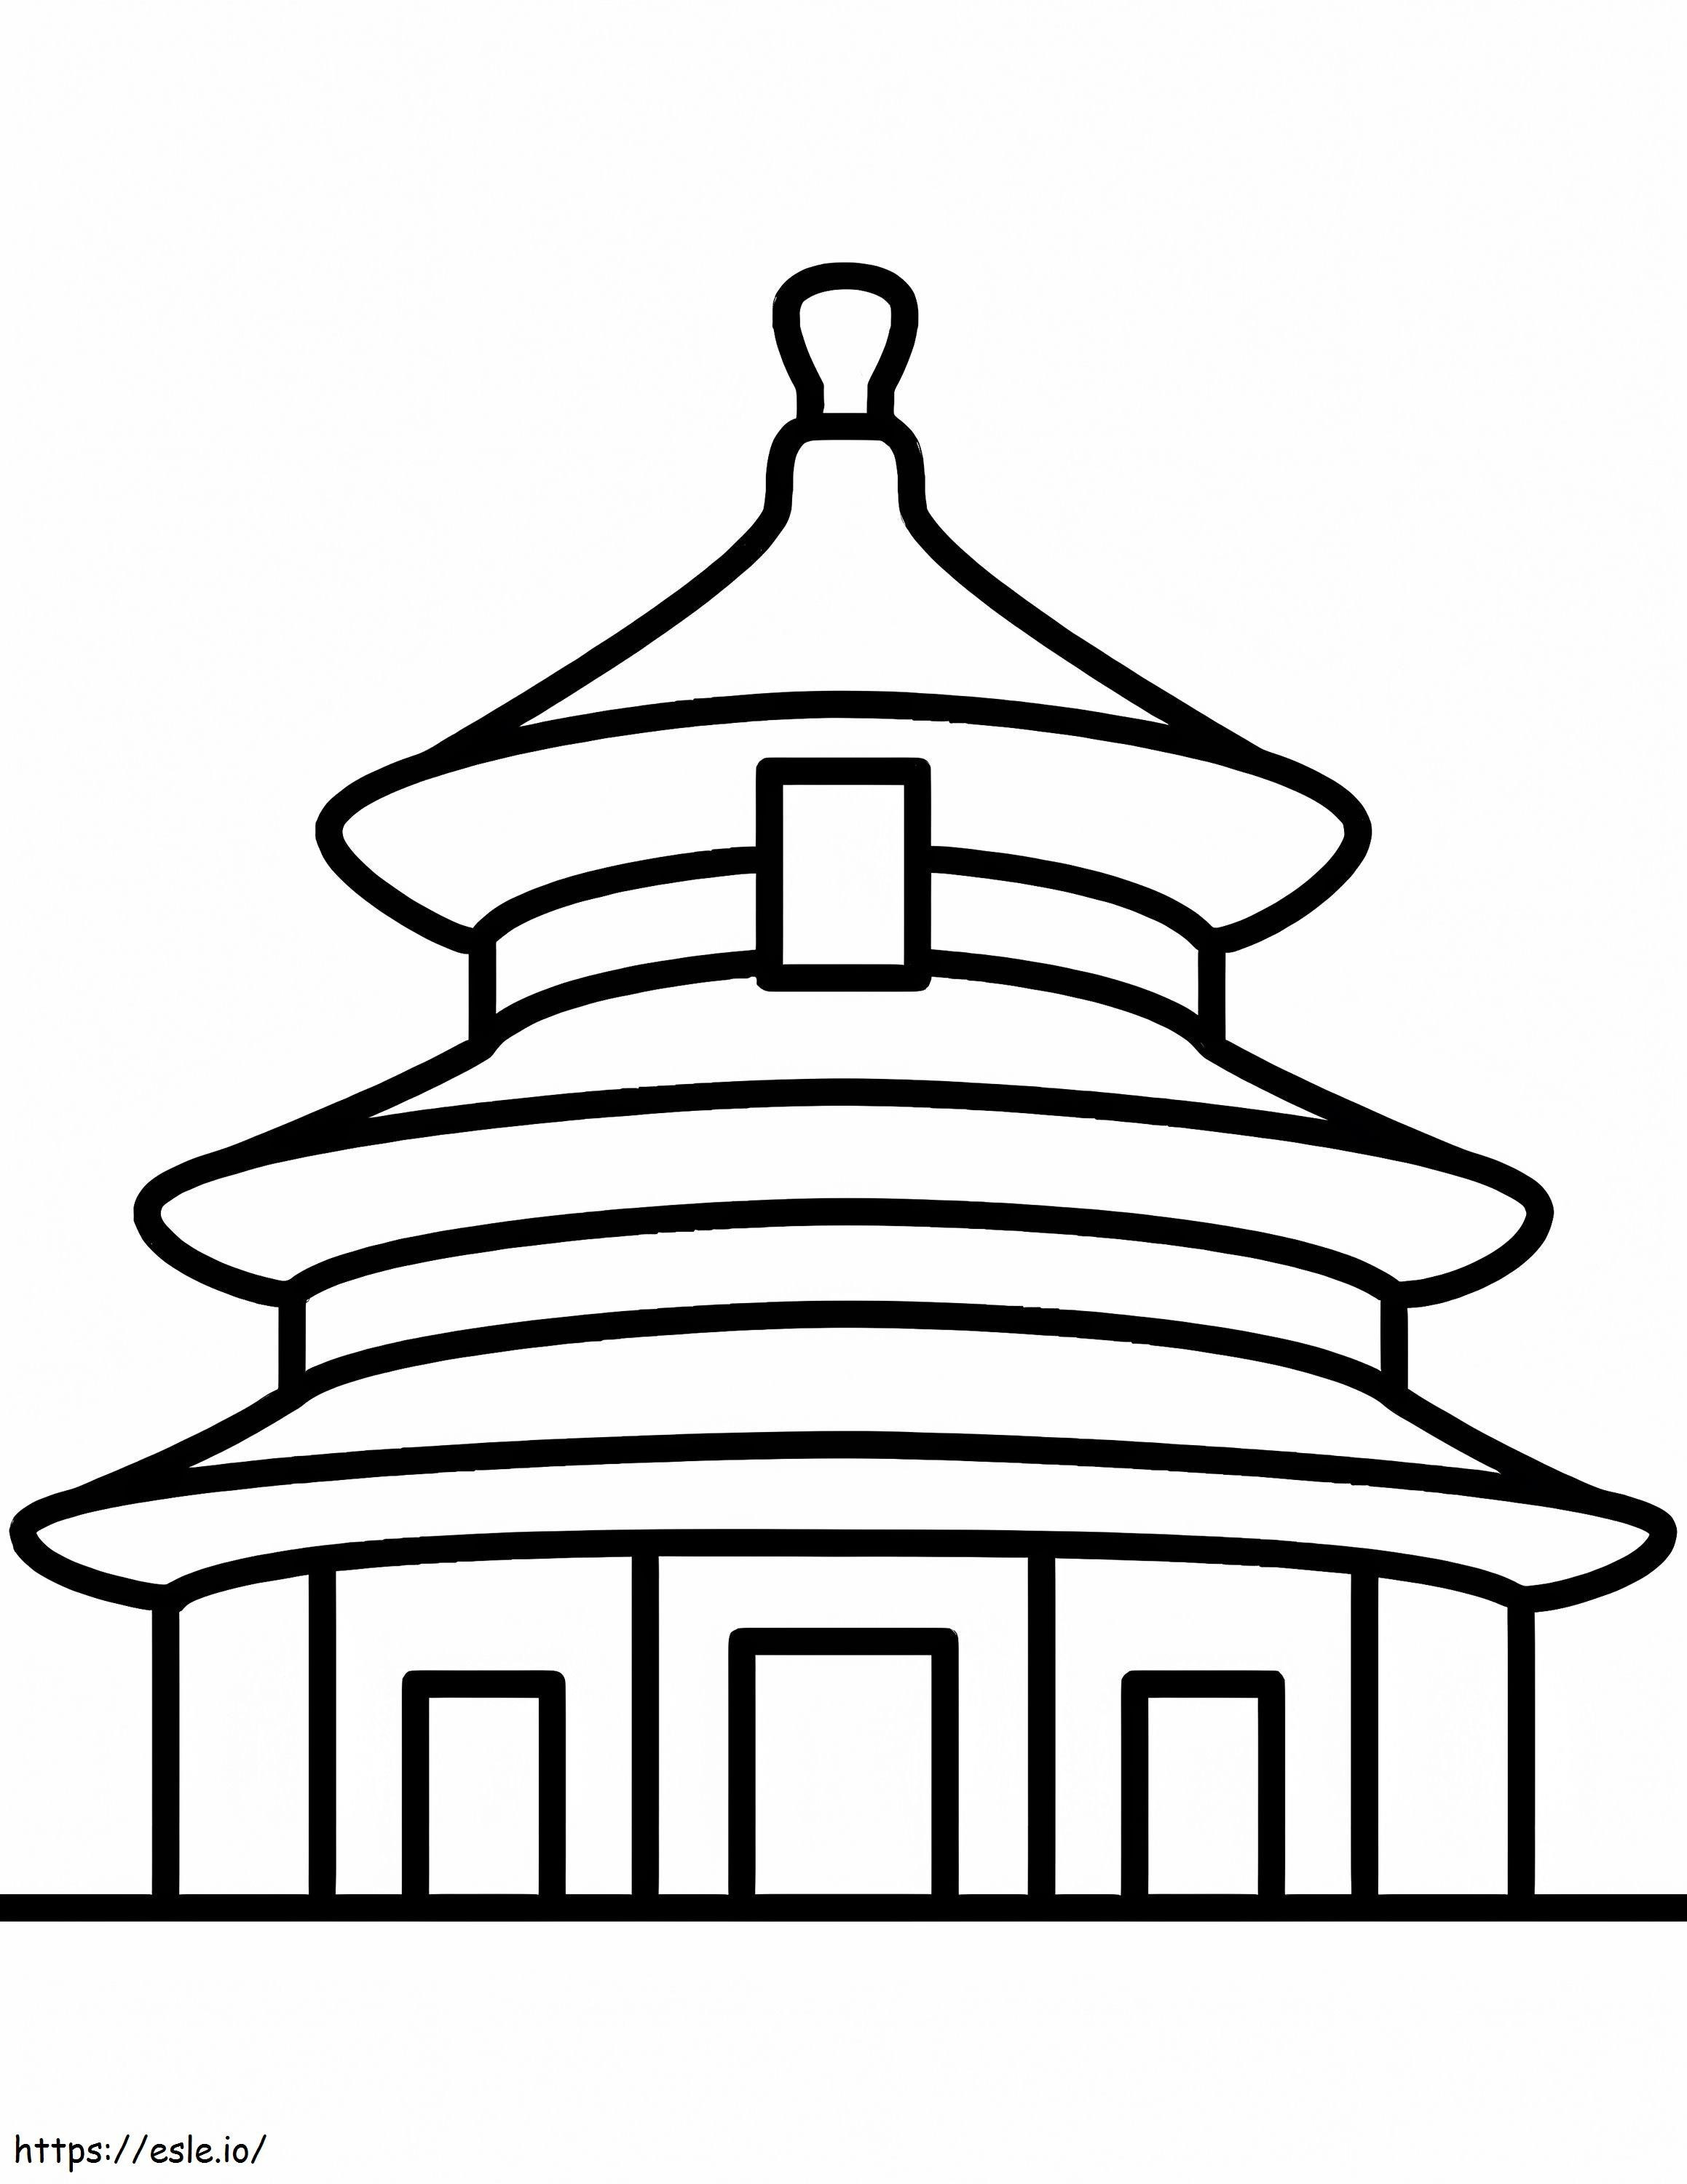 Temple Of Heaven In Beijing coloring page